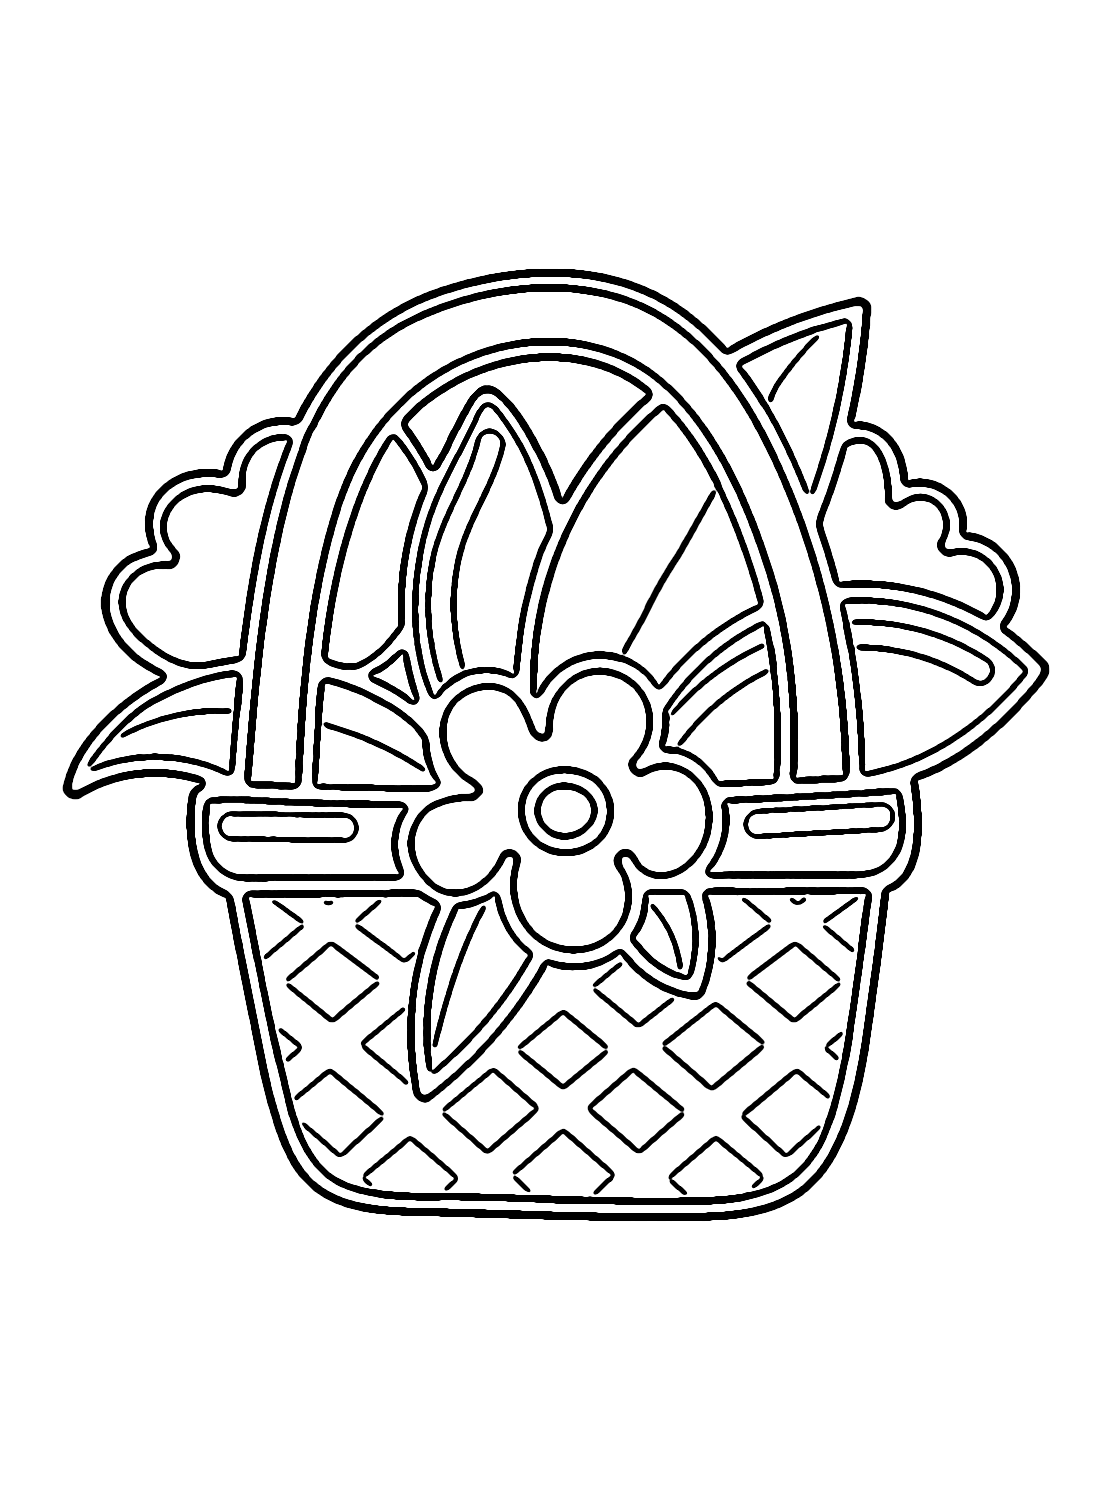 Draw Easy Flower Basket Coloring Page